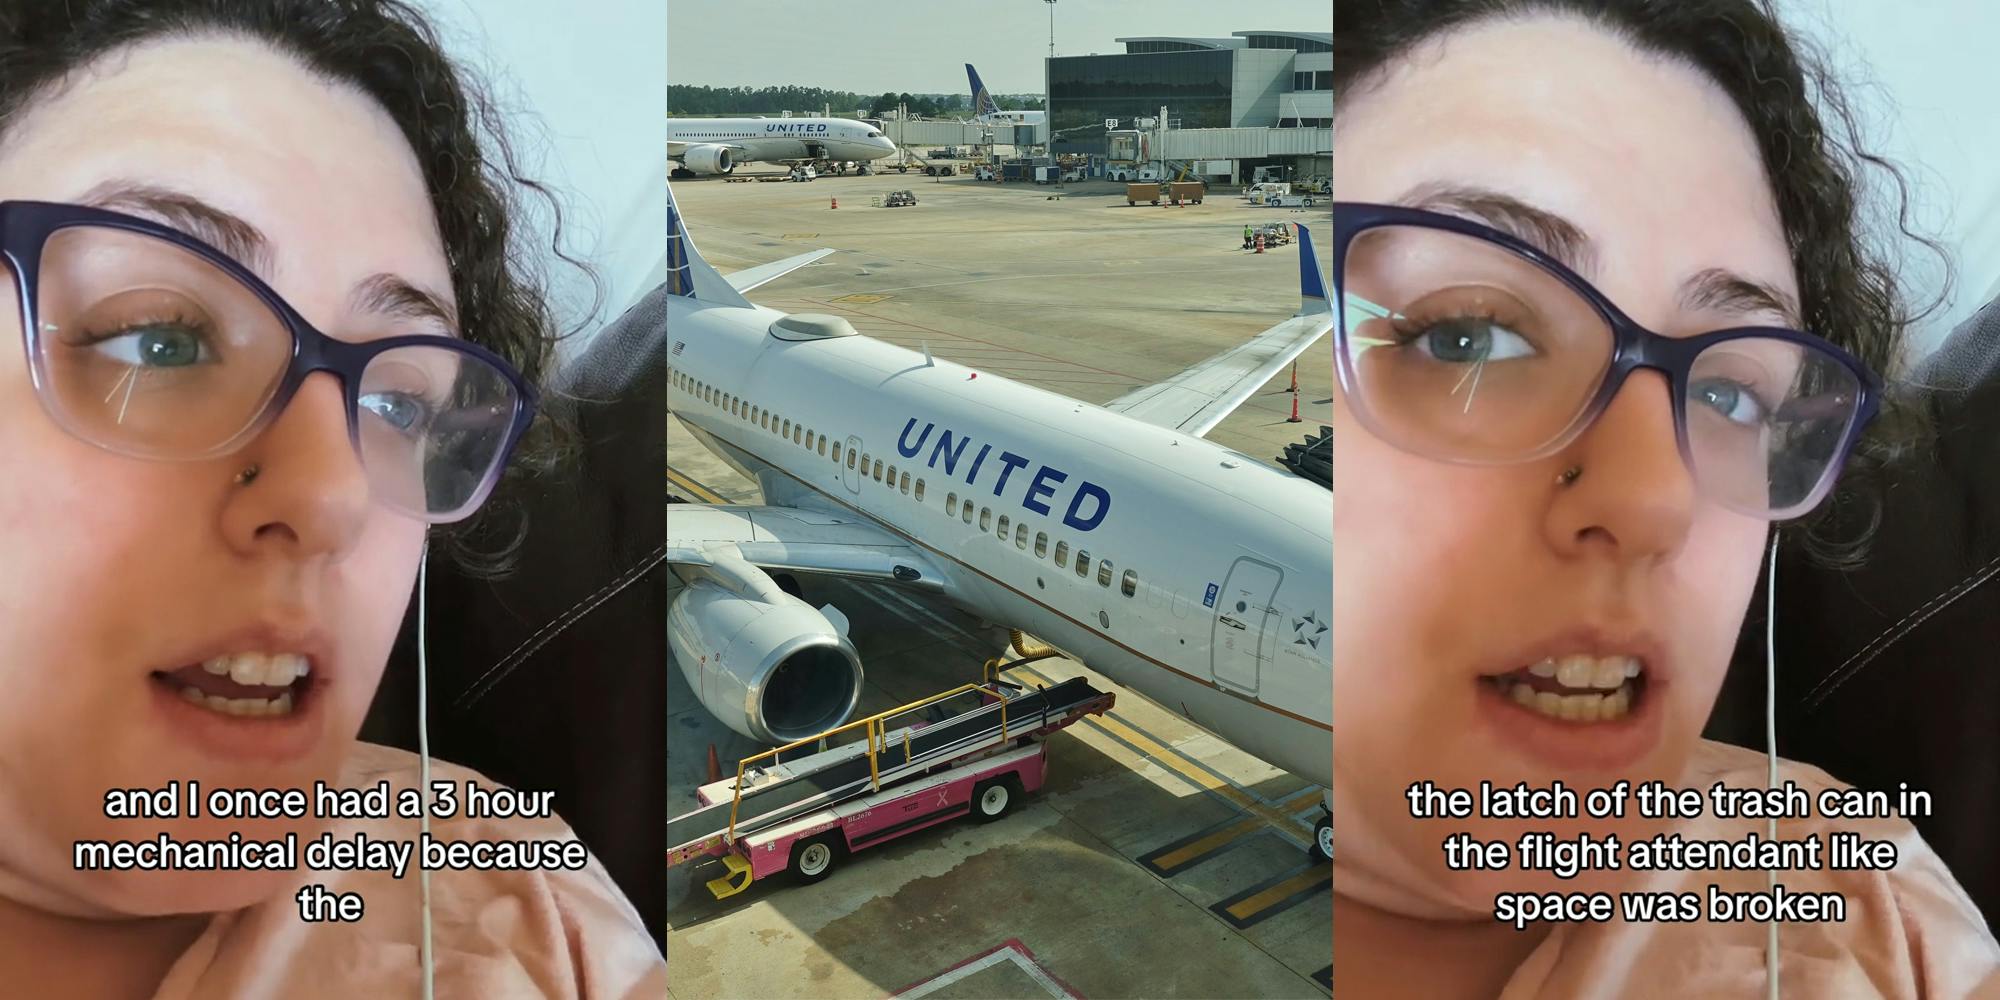 former United Airlines gate agent speaking with caption "and I once had a 3 hour mechanical delay because the" (l) United Airlines plane in runway (c) former United Airlines gate agent speaking with caption "the latch of the trash can in the flight attendant like space was broken" (r)